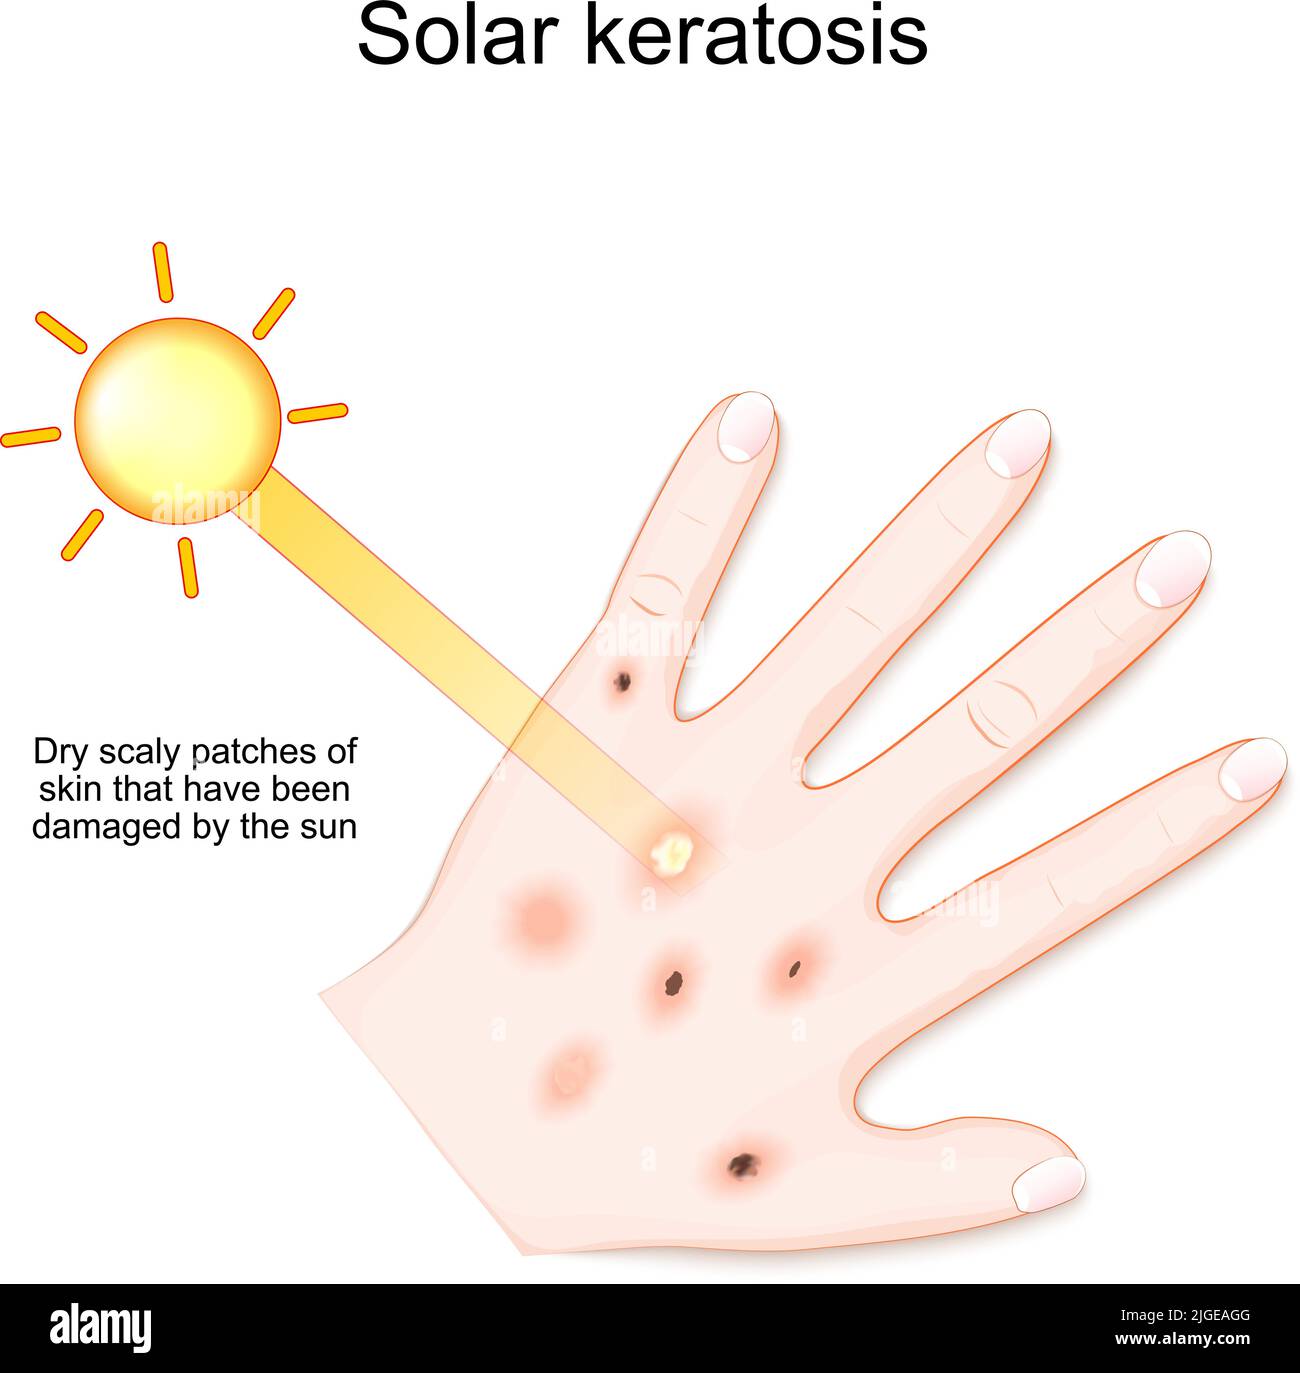 Solar keratosis. Dry scaly patches of skin that have been damaged by the sun. Human's palm with rash after sun. vector illustration Stock Vector